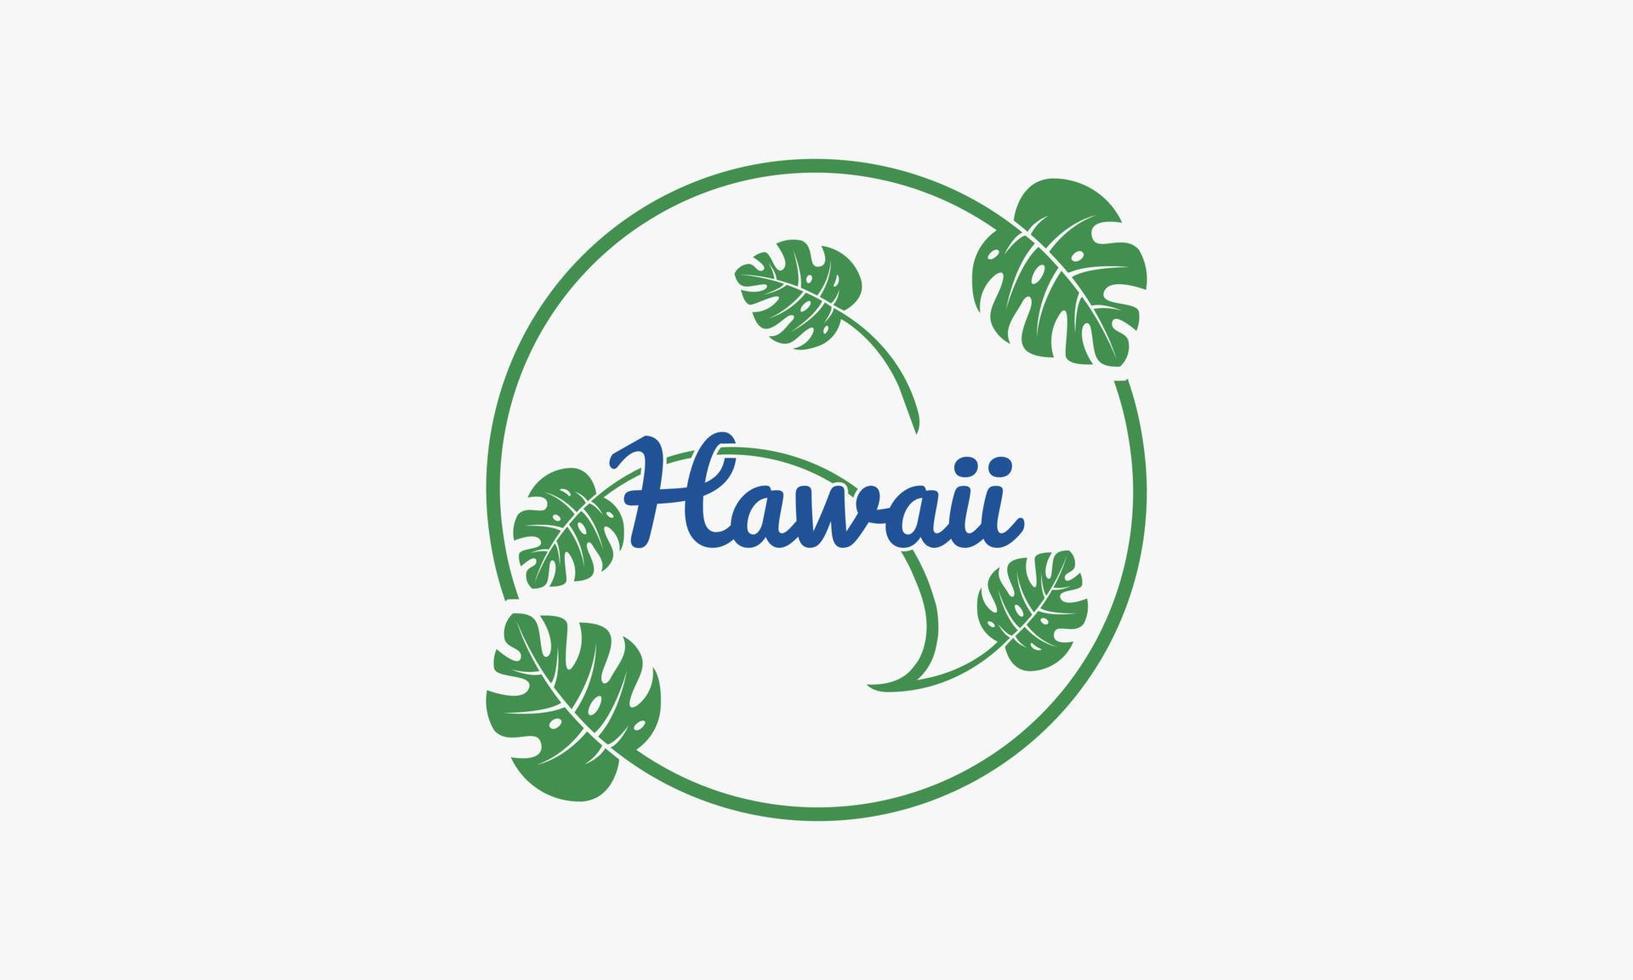 hawaii text with monstera leaves design vector isolated on white background.